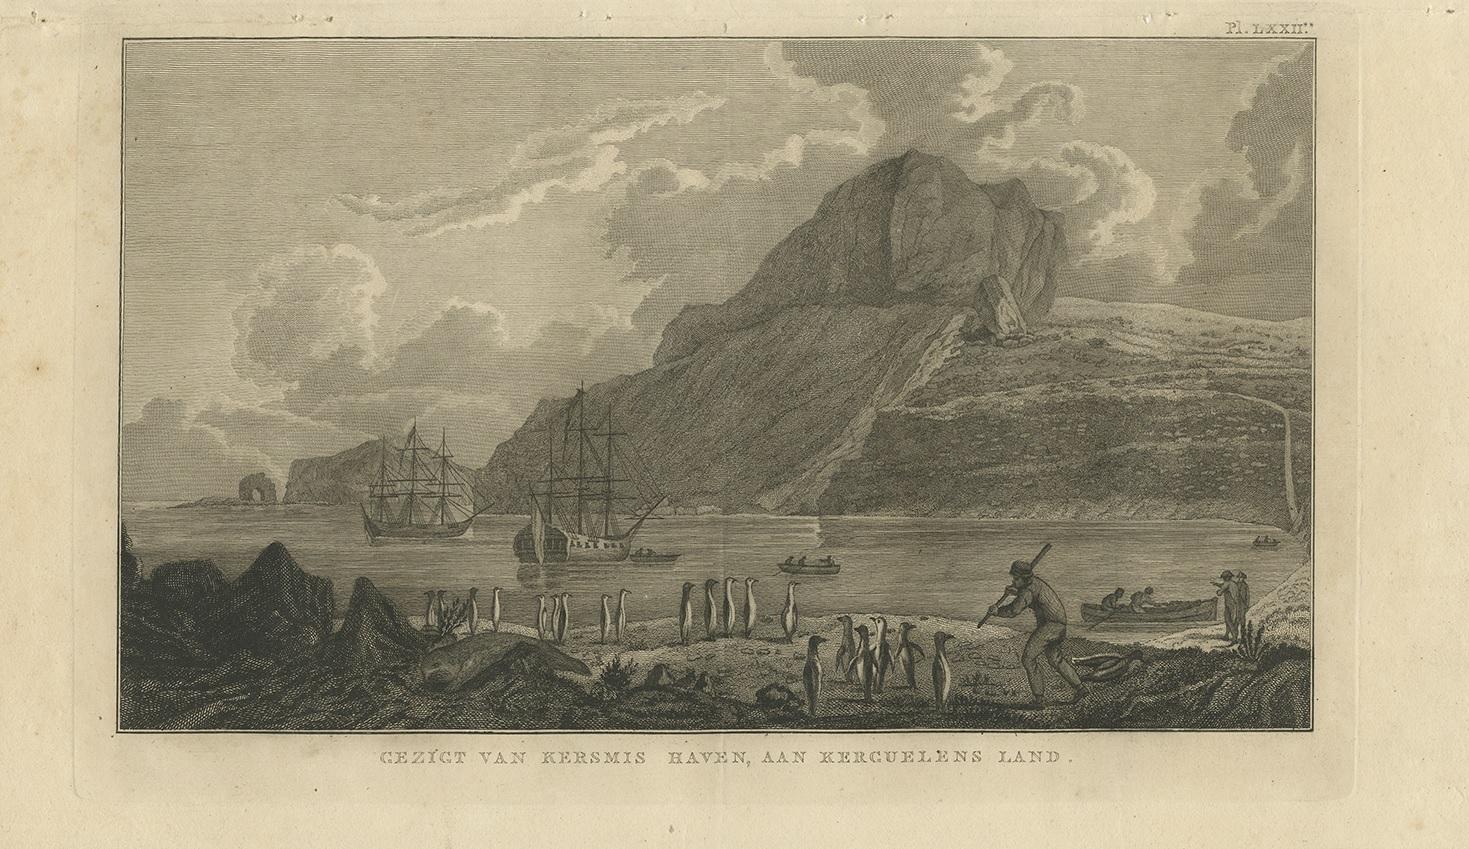 Dutch Antique Print of The Kerguelen Islands or the Desolation Islands by Cook, 1803